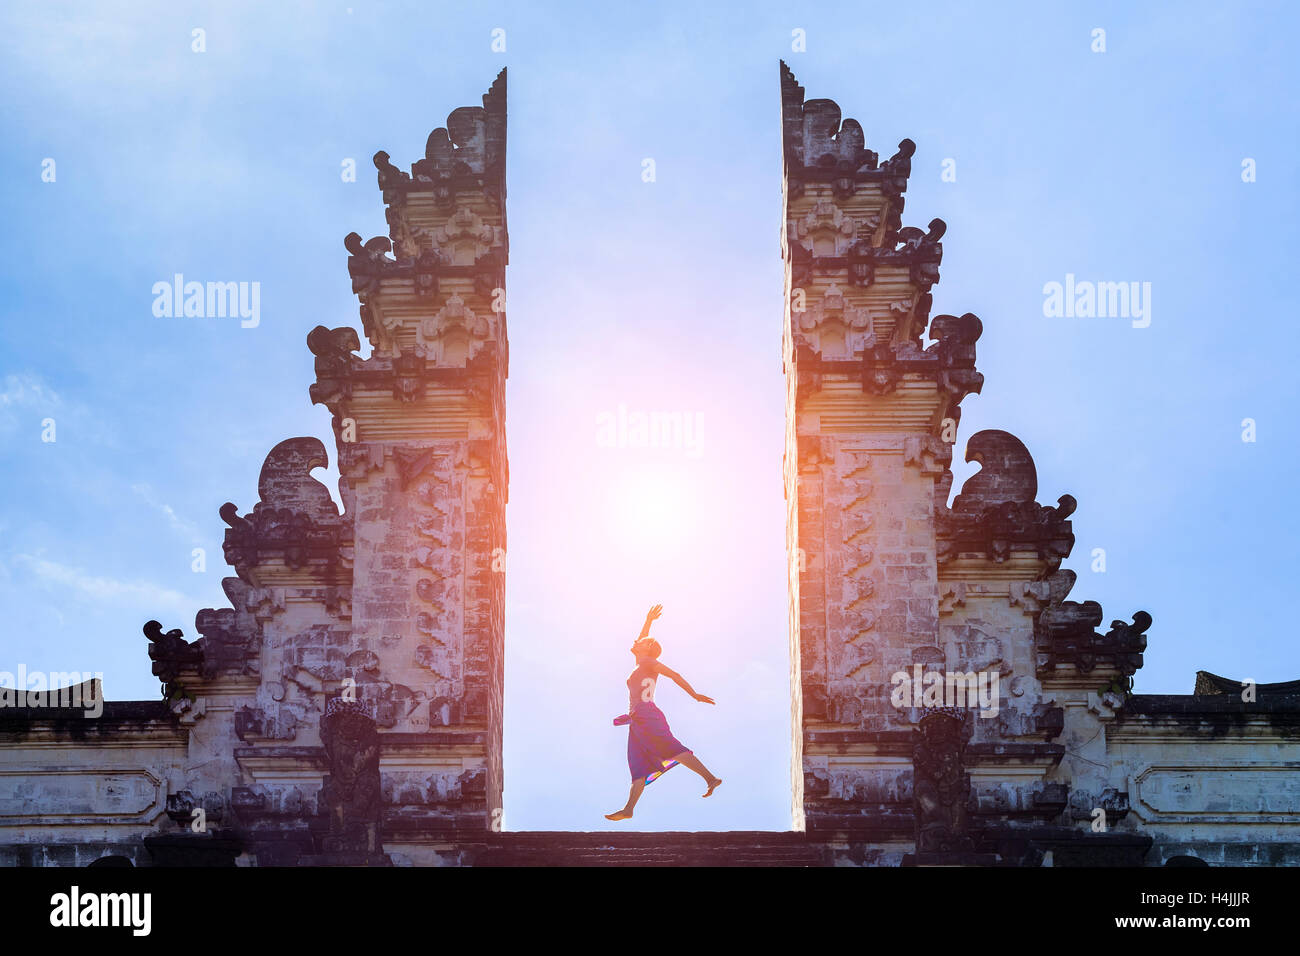 Woman traveler jumping with energy and vitality in the gate of a temple, Bali, Indonesia Stock Photo